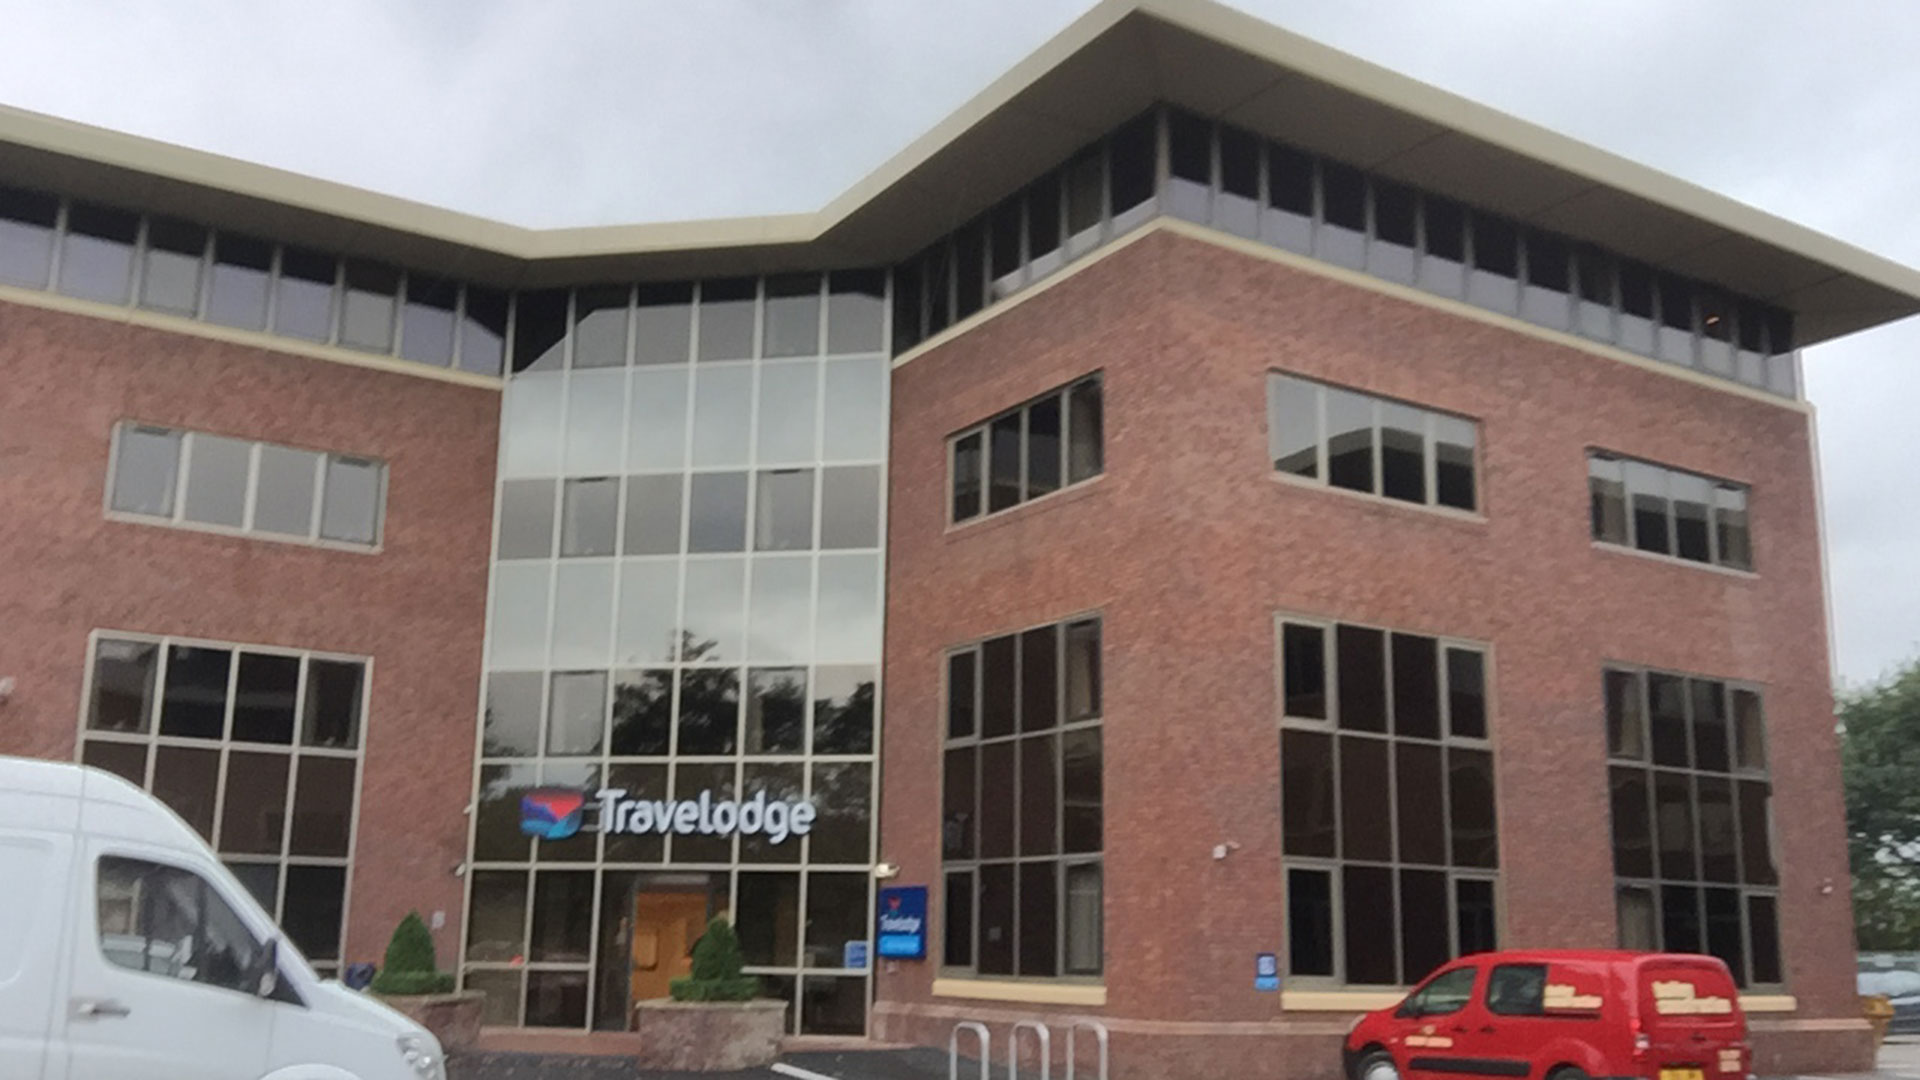 travelodge mattresses for sale